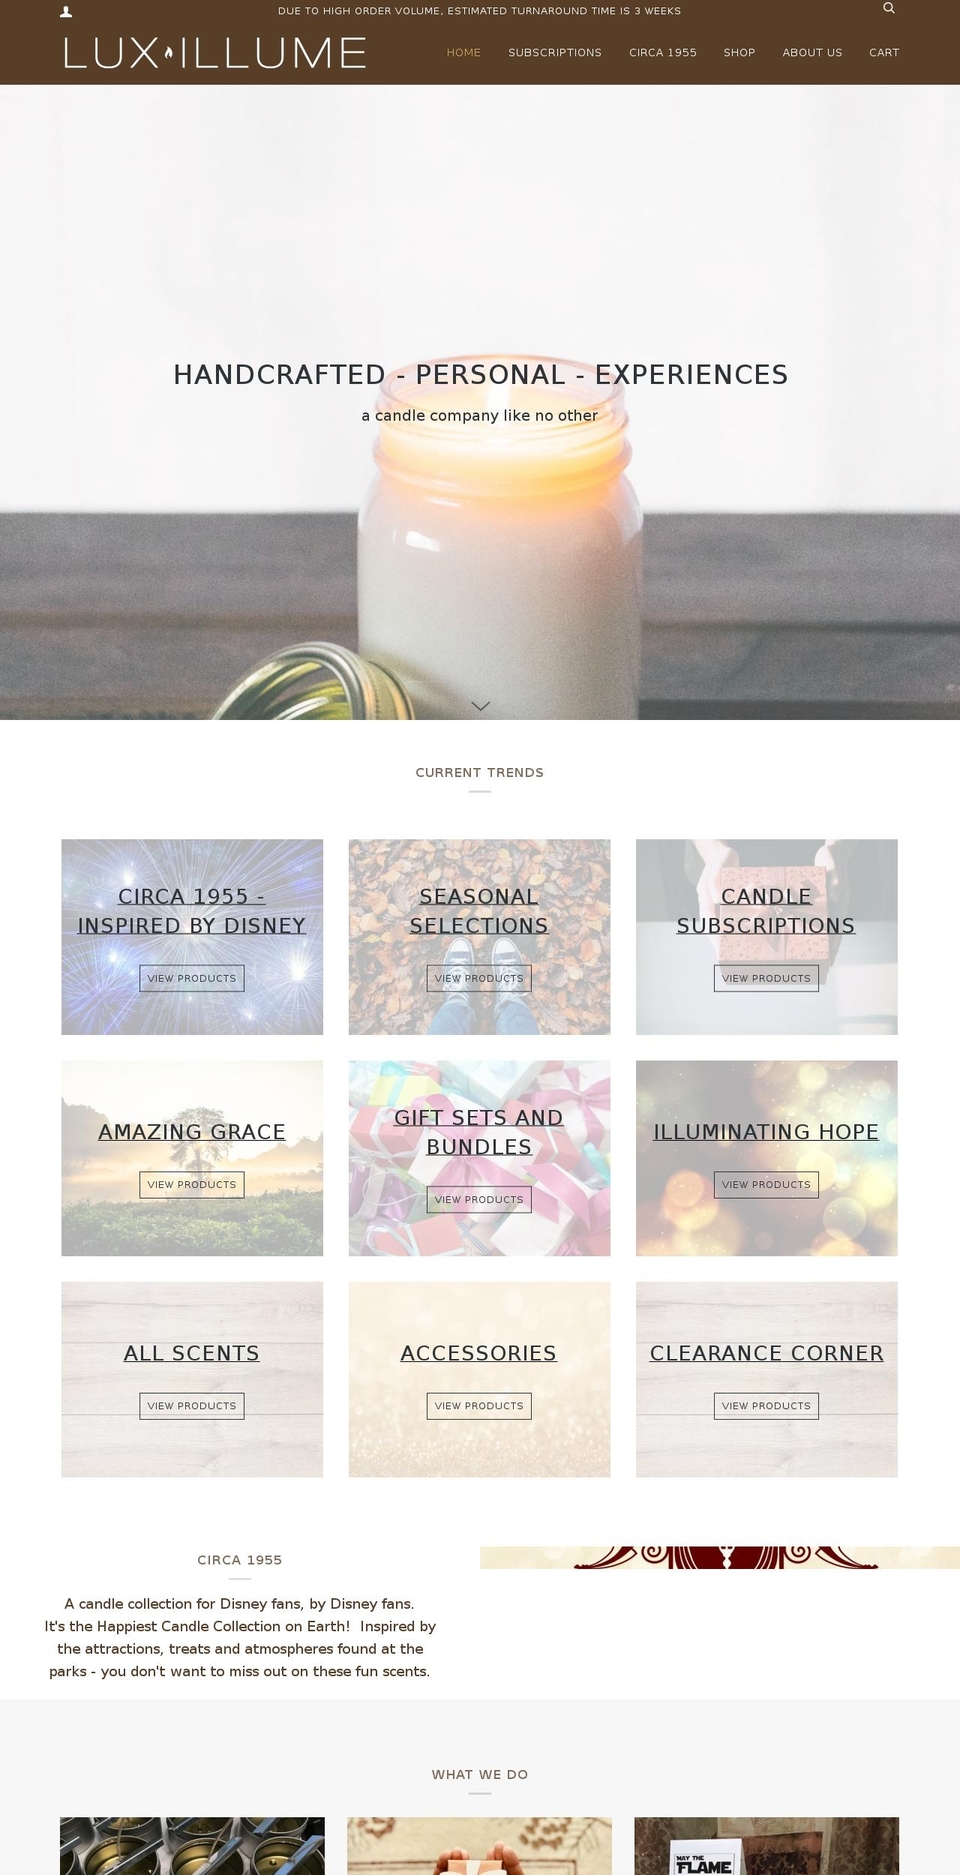 Copy of Pipeline Shopify theme site example luxillume.com